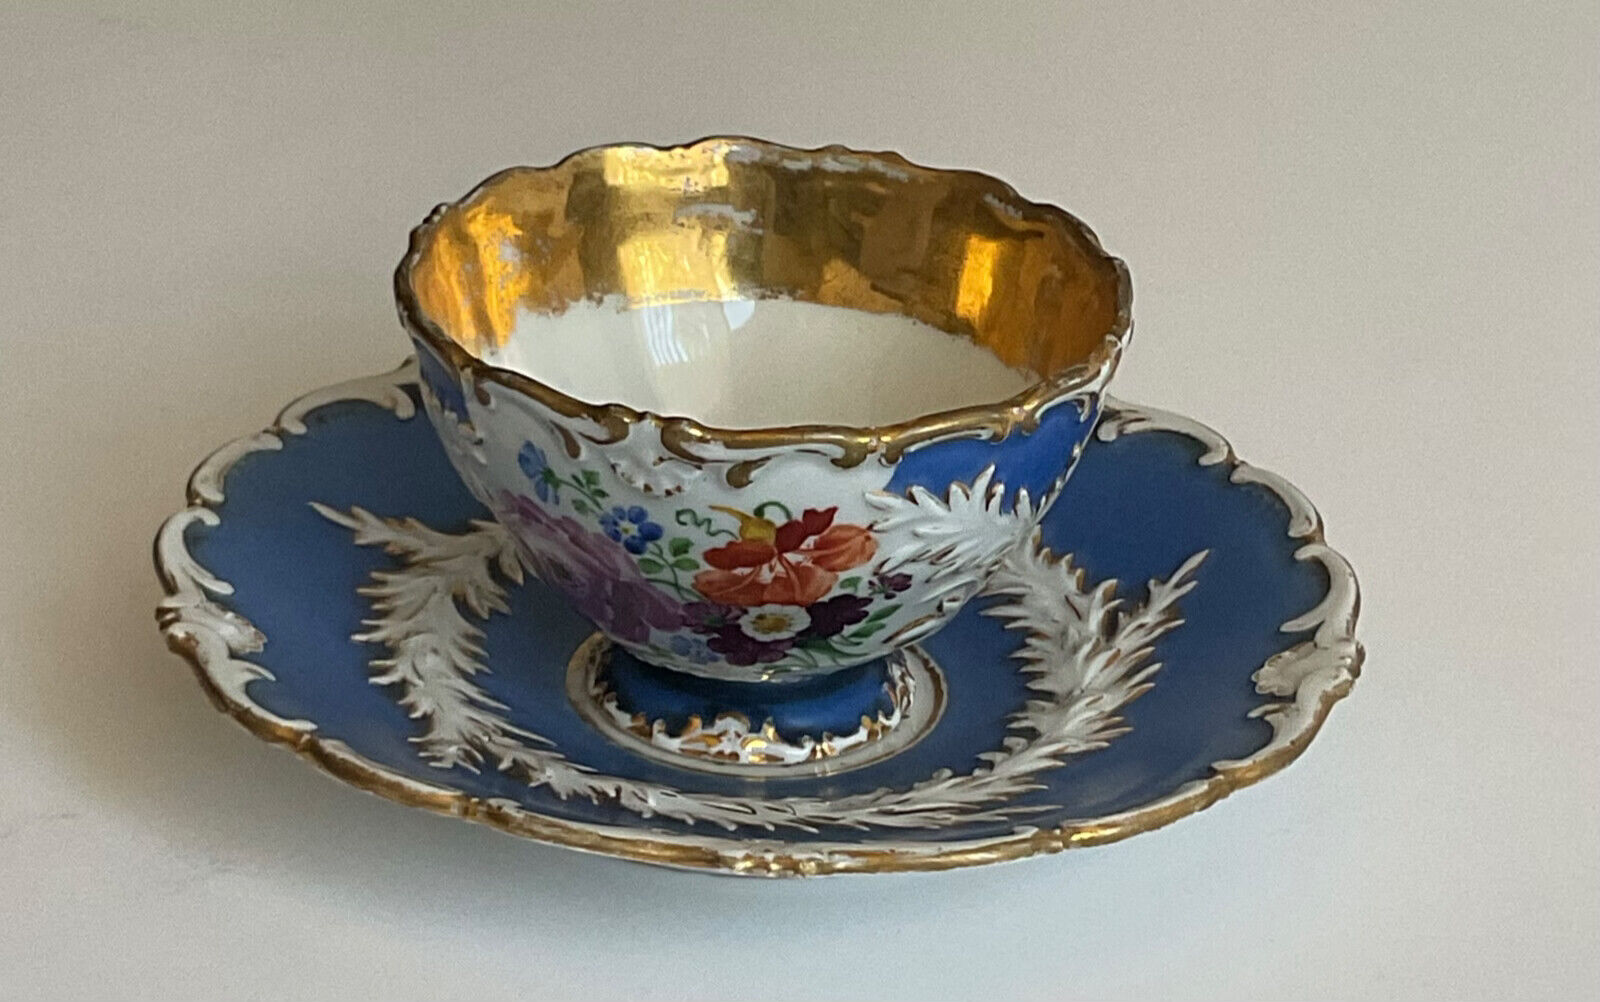 antique meissen blue and white with gold floral teacup and saucer 1925